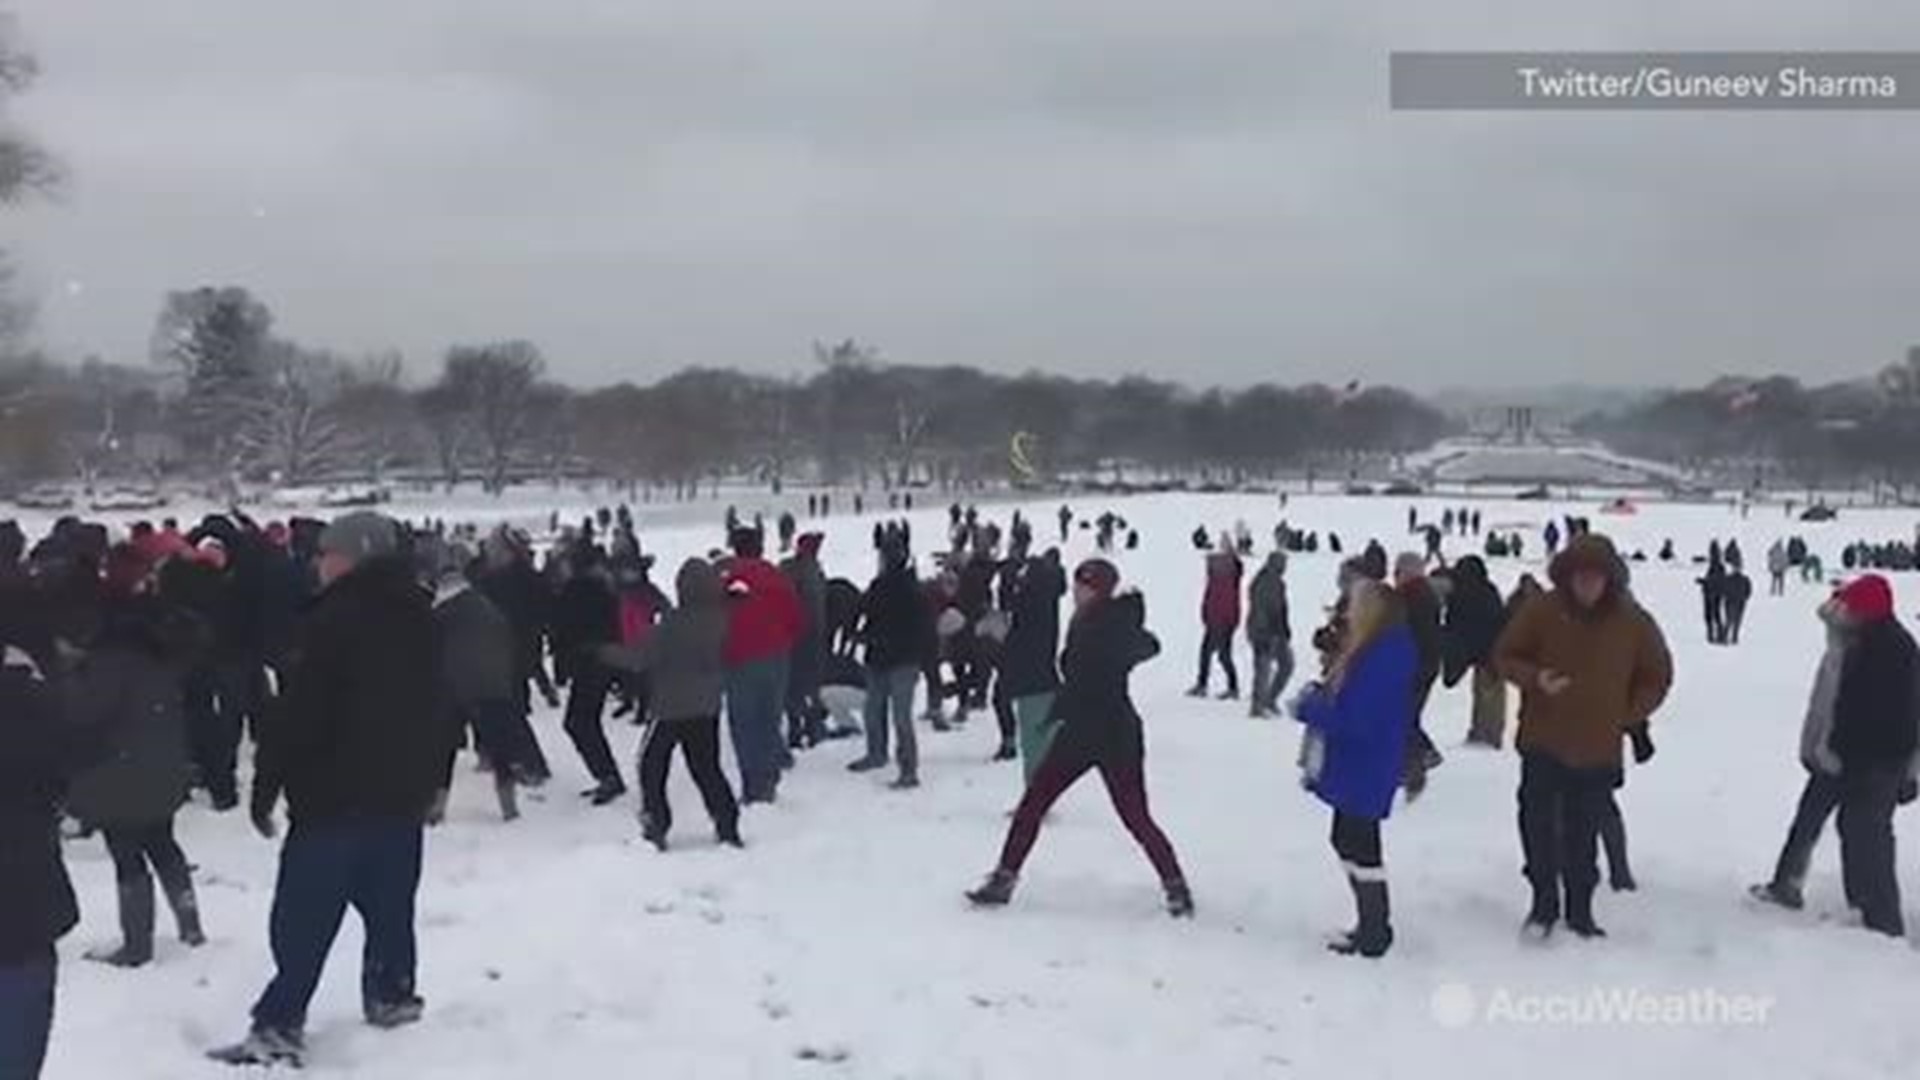 After a giant storm hit Washington D.C. the morning of Jan. 13, residents came out to the National Mall where a massive, impromptu snowball fight had begun!